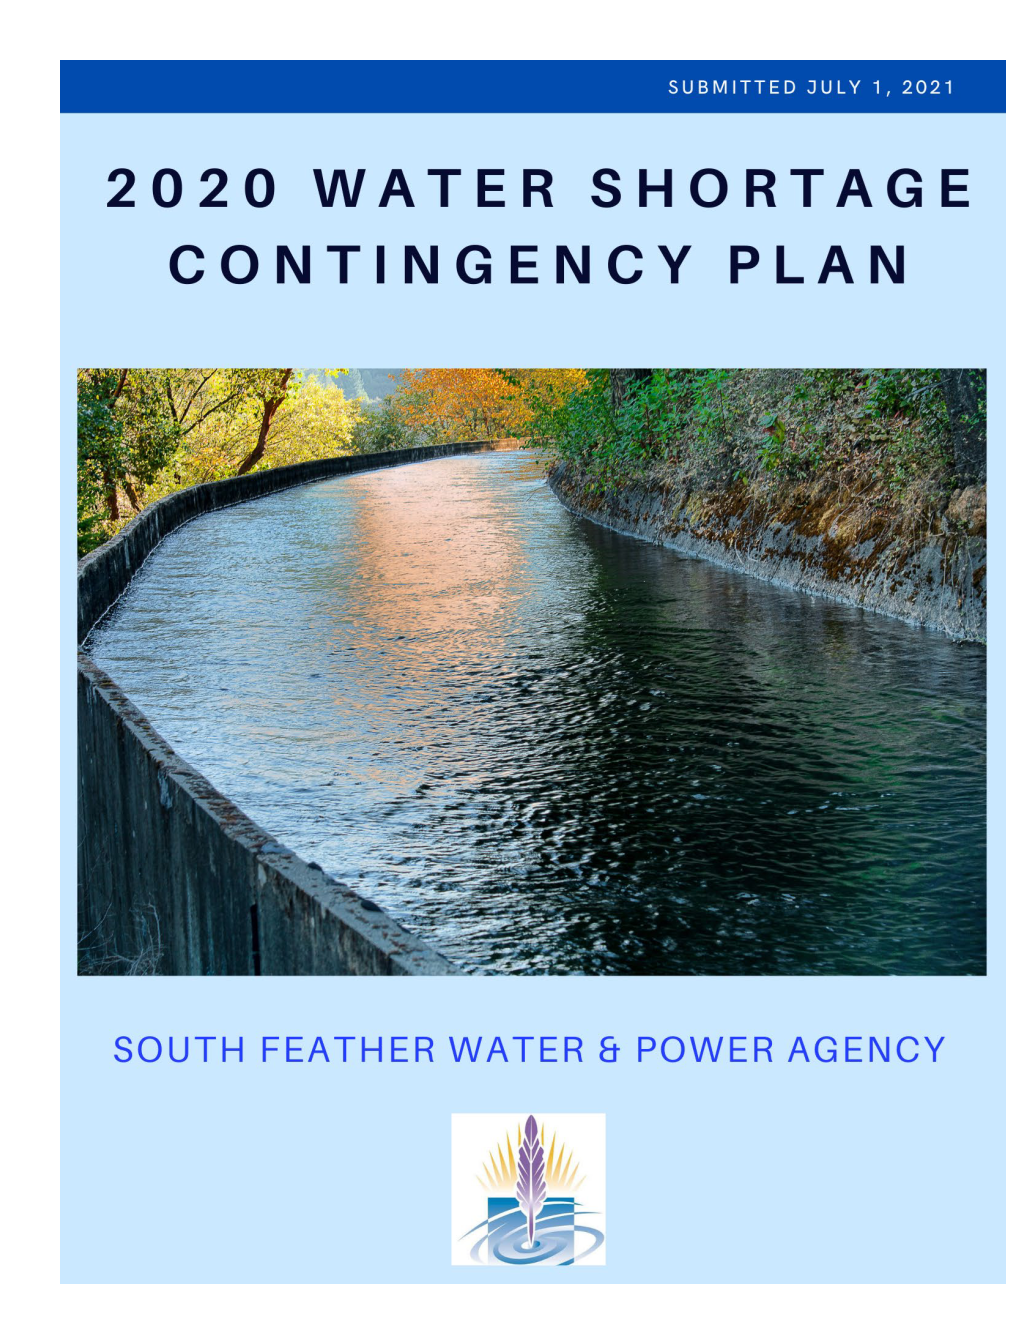 South Feather Water & Power Agency Water Shortage Contingency Plan